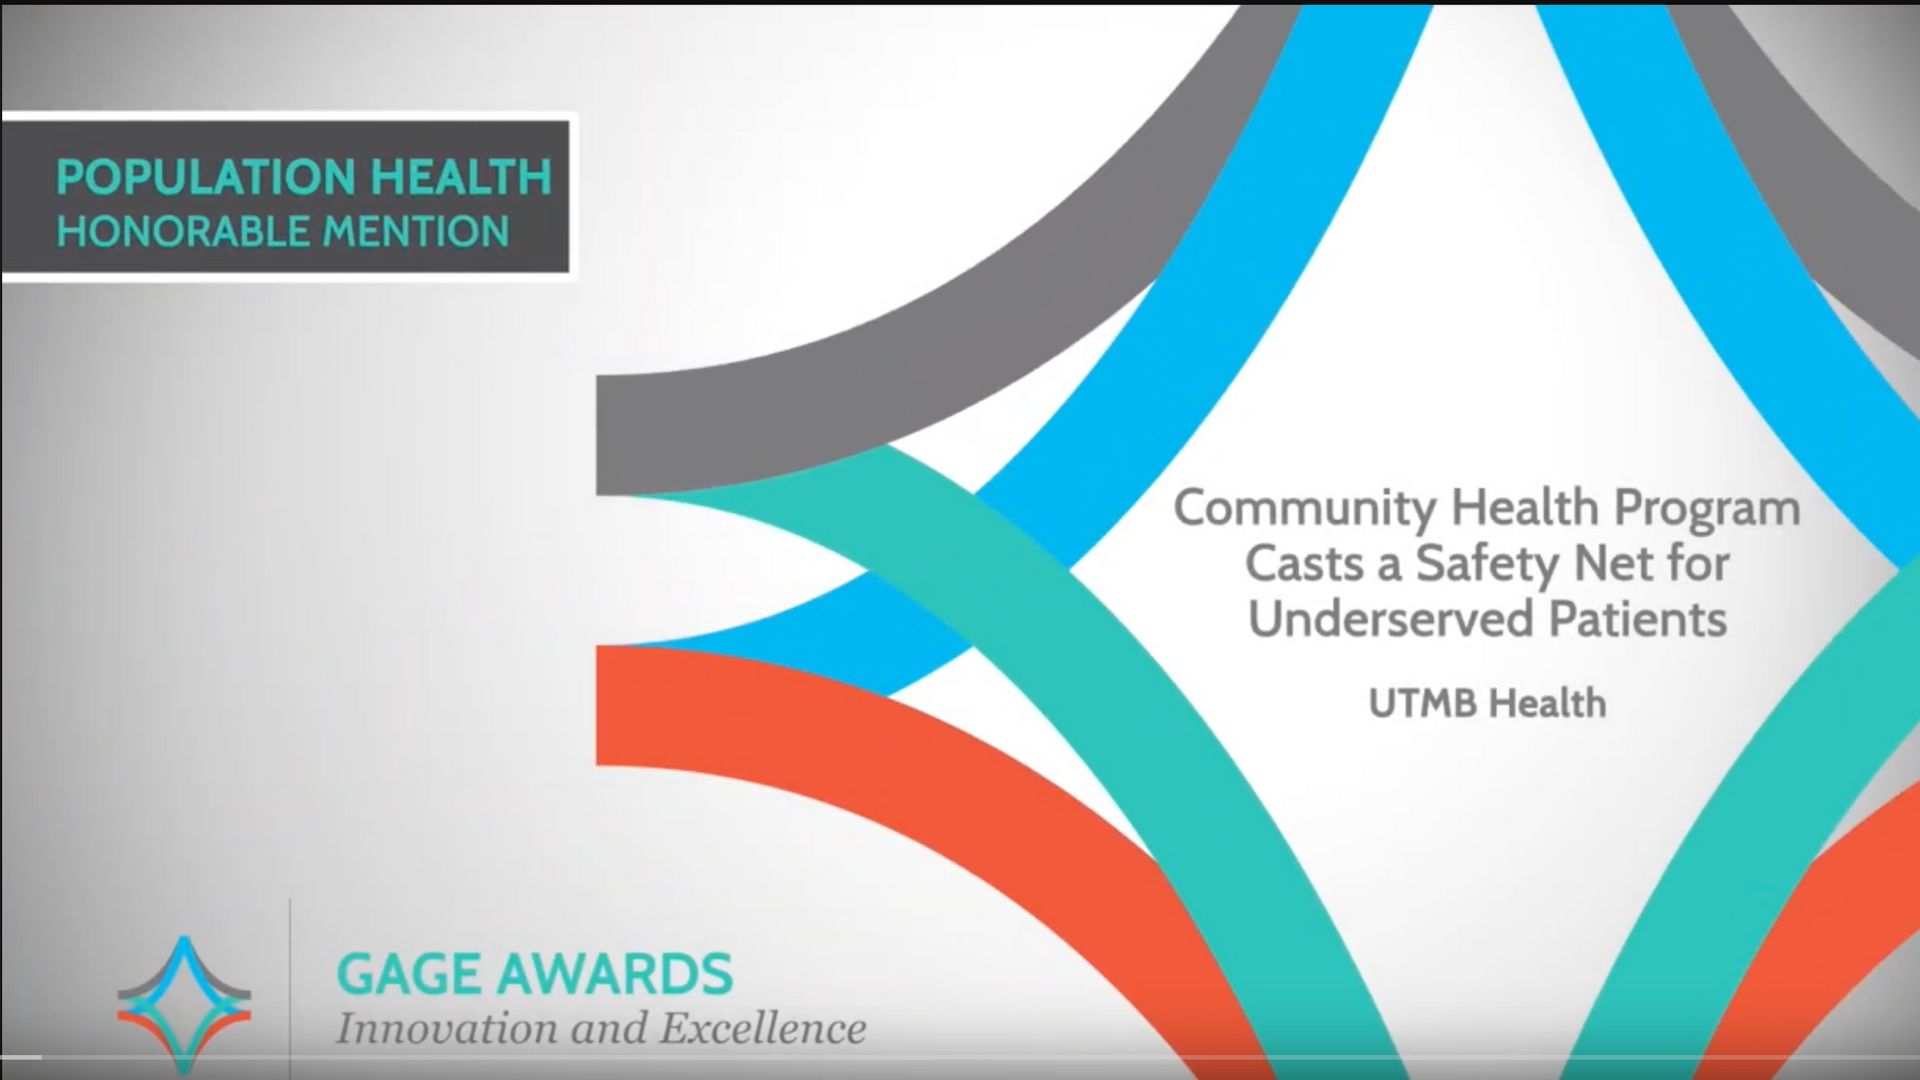 Population Health Honorabl Mention. Community health program casts a safety net for underserved patients UTMB Health. Gage Awards Innovation and Excellence